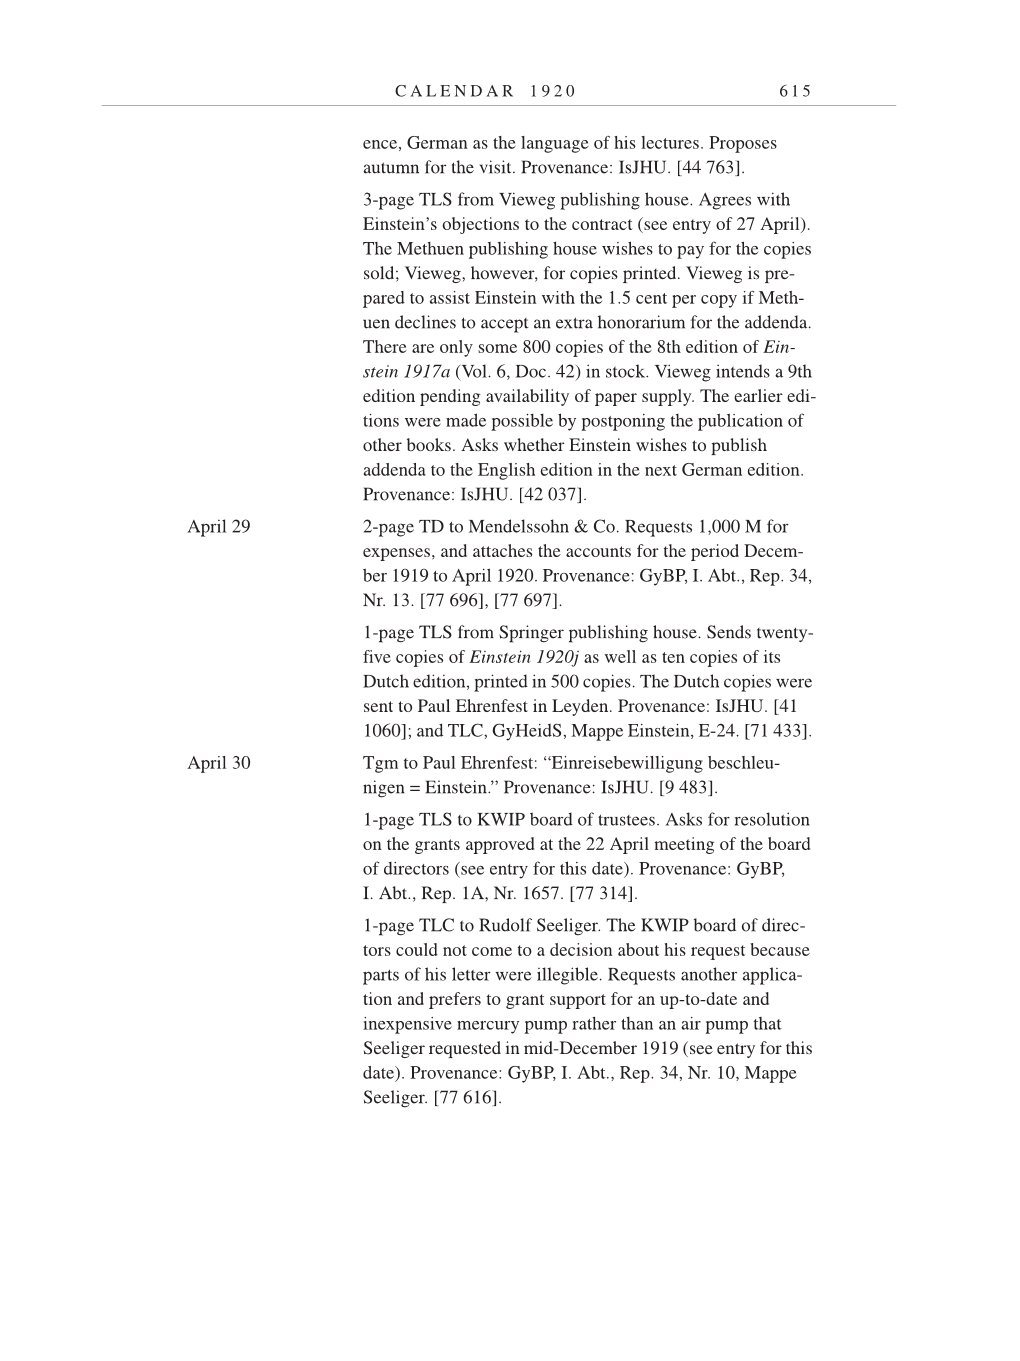 Volume 9: The Berlin Years: Correspondence January 1919-April 1920 page 615